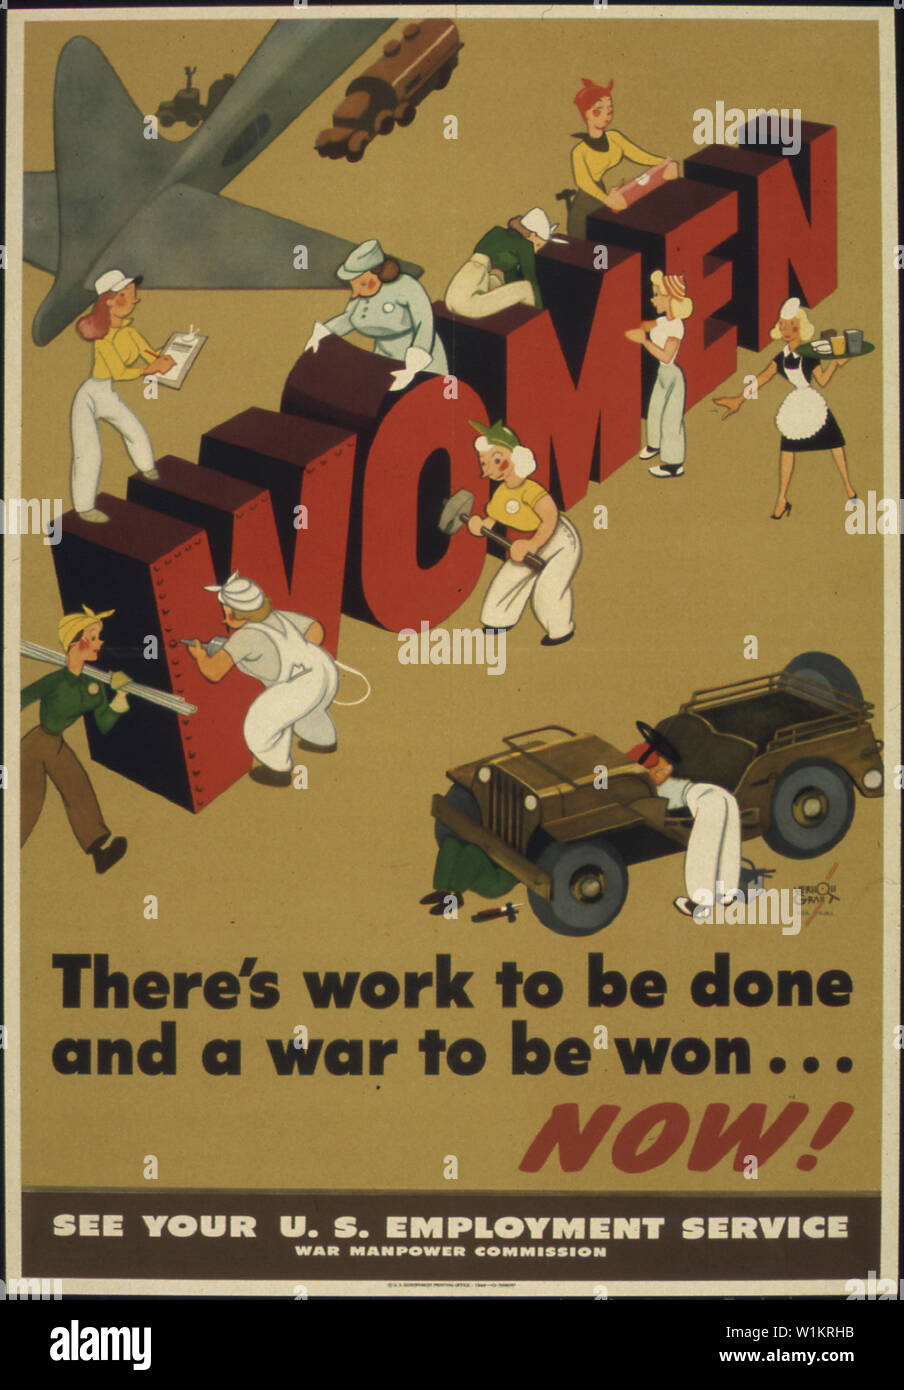 WOMEN THERE'S WORK TO BE DONE AND A WAR TO BE WON NOW! Stock Photo